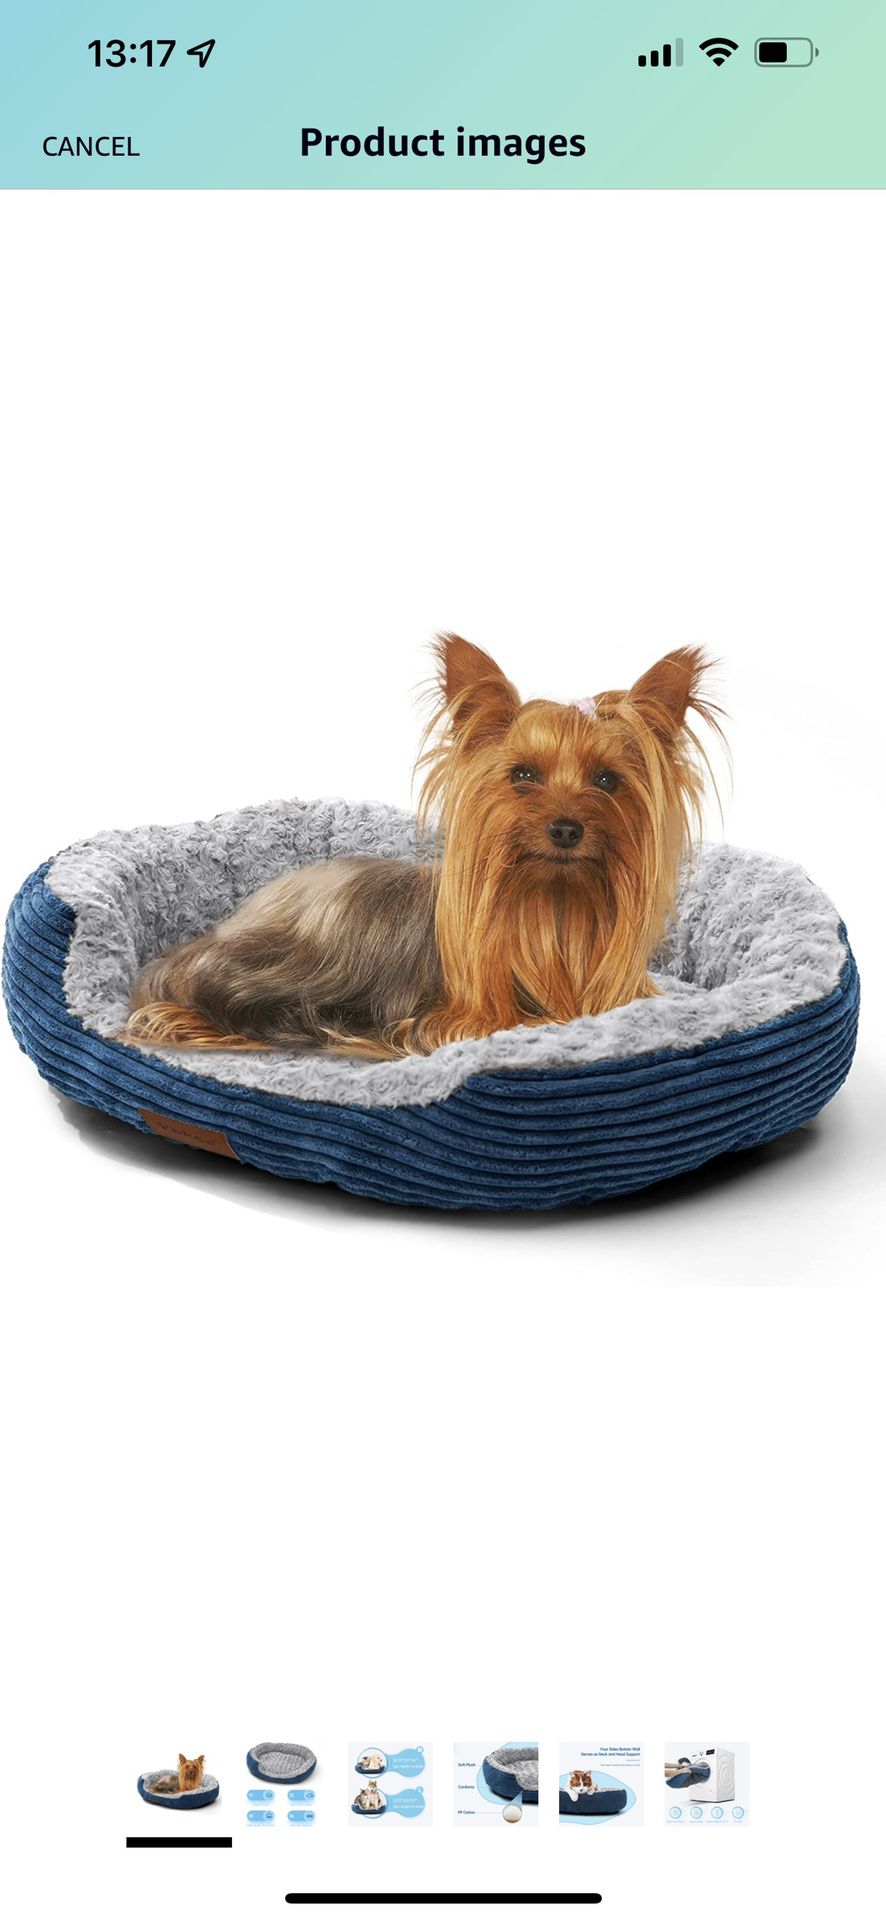 Dog Bed Low Leading Edge - Breathable Soft Plush Pet Bed, Machine Washable Dog Couch, Waterproof Nonskid Orthopedic Dog Bed